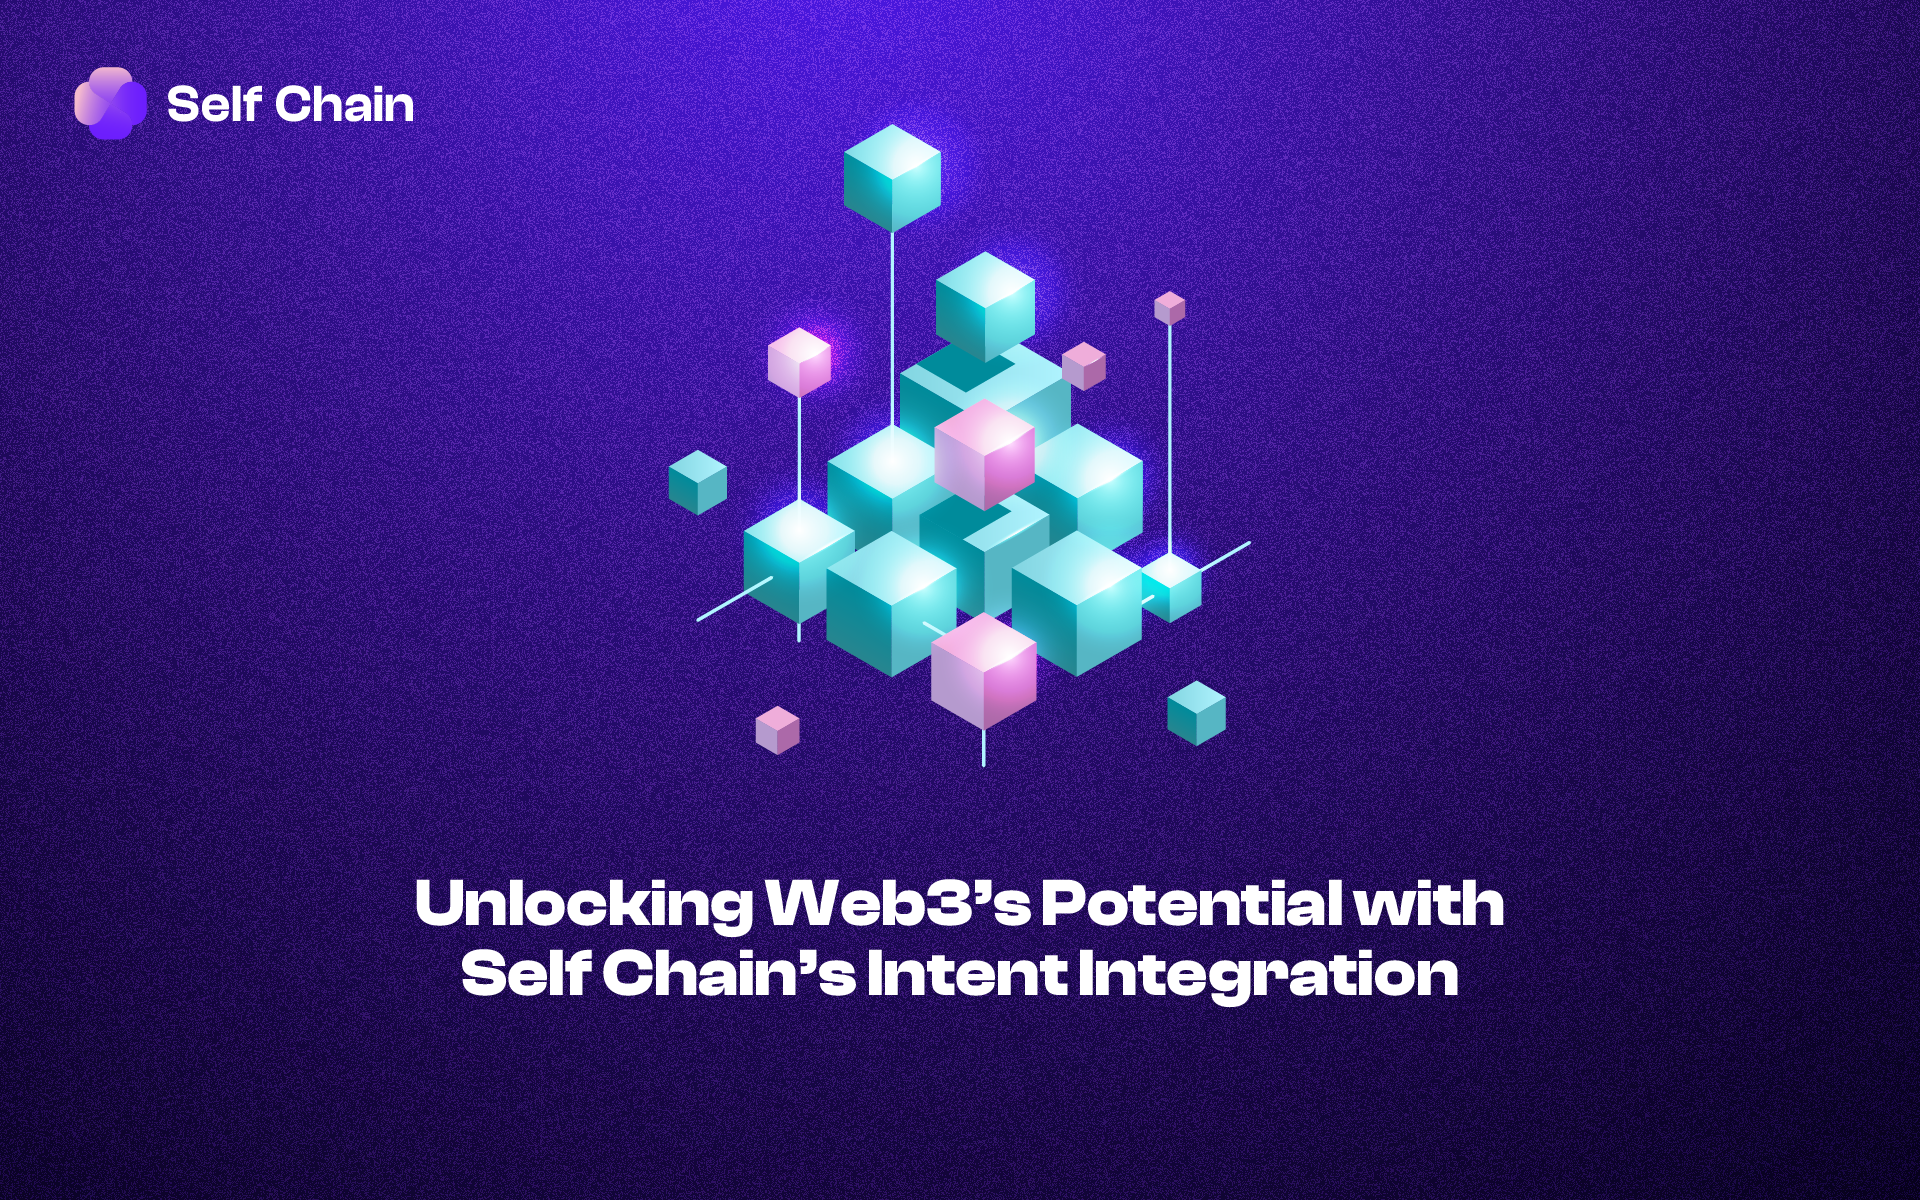 Unlocking Web3’s Potential with Self Chain’s Intent Integration